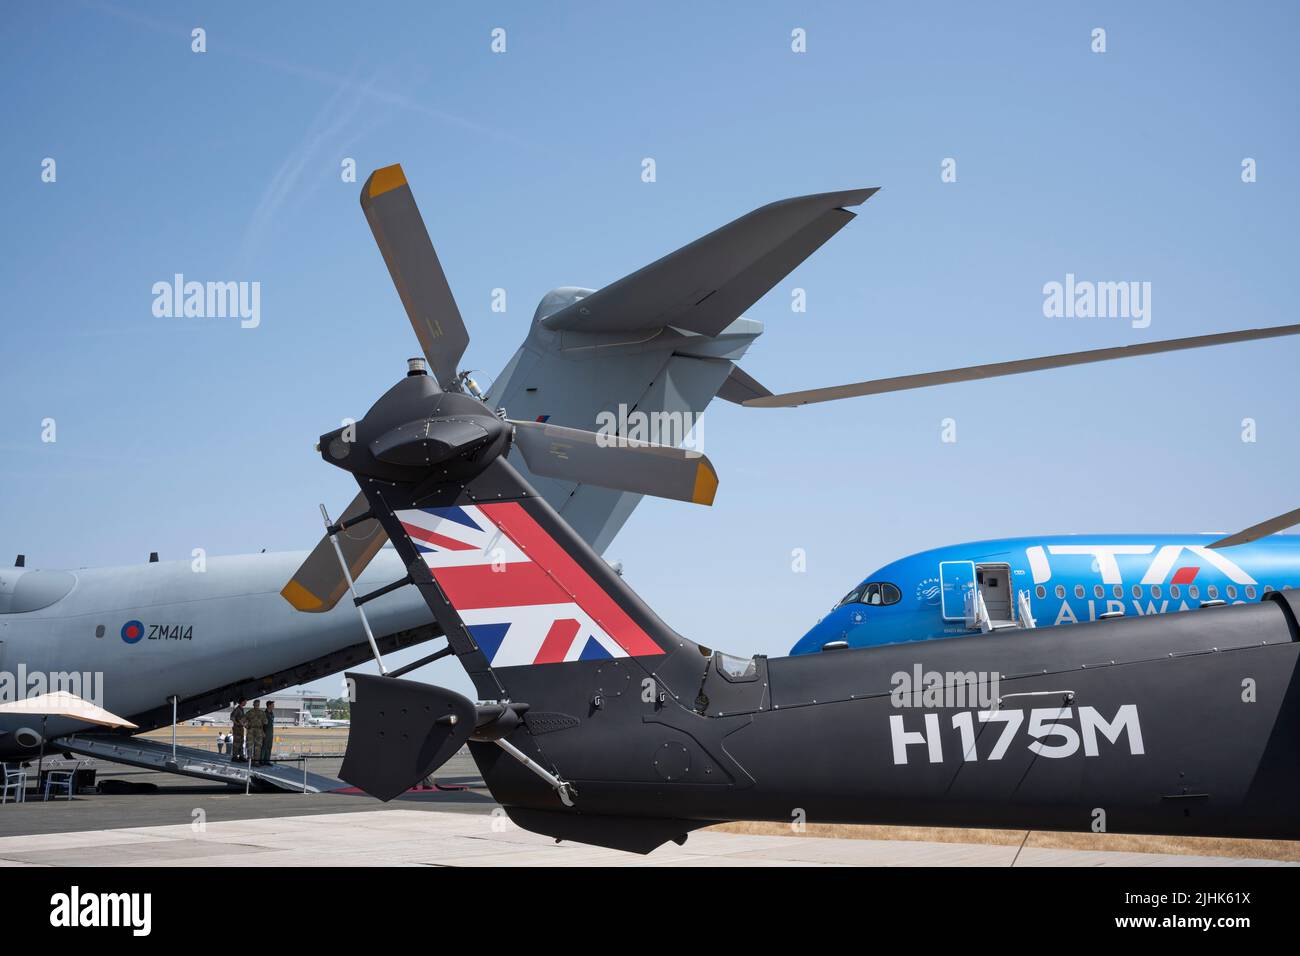 Assorted Airbus aircraft in the foreground including an RAF A400, the tail of a H175M helicopter and the nose of an A350-900 at the Farnborough Airshow, on 18th July 2022, at Farnborough, England. The Farnborough International Airshow (FIA) is an aerospace and defence industry trade fair which, due to Covid, is being held for the first time in four years. The pandemic has had a major impact on commercial aviation, while the war in Ukraine has changed the mindset for defence industries. There are 1,200 exhibitors from 42 countries here with organisers hoping to attract more than 80,000 visitors Stock Photo